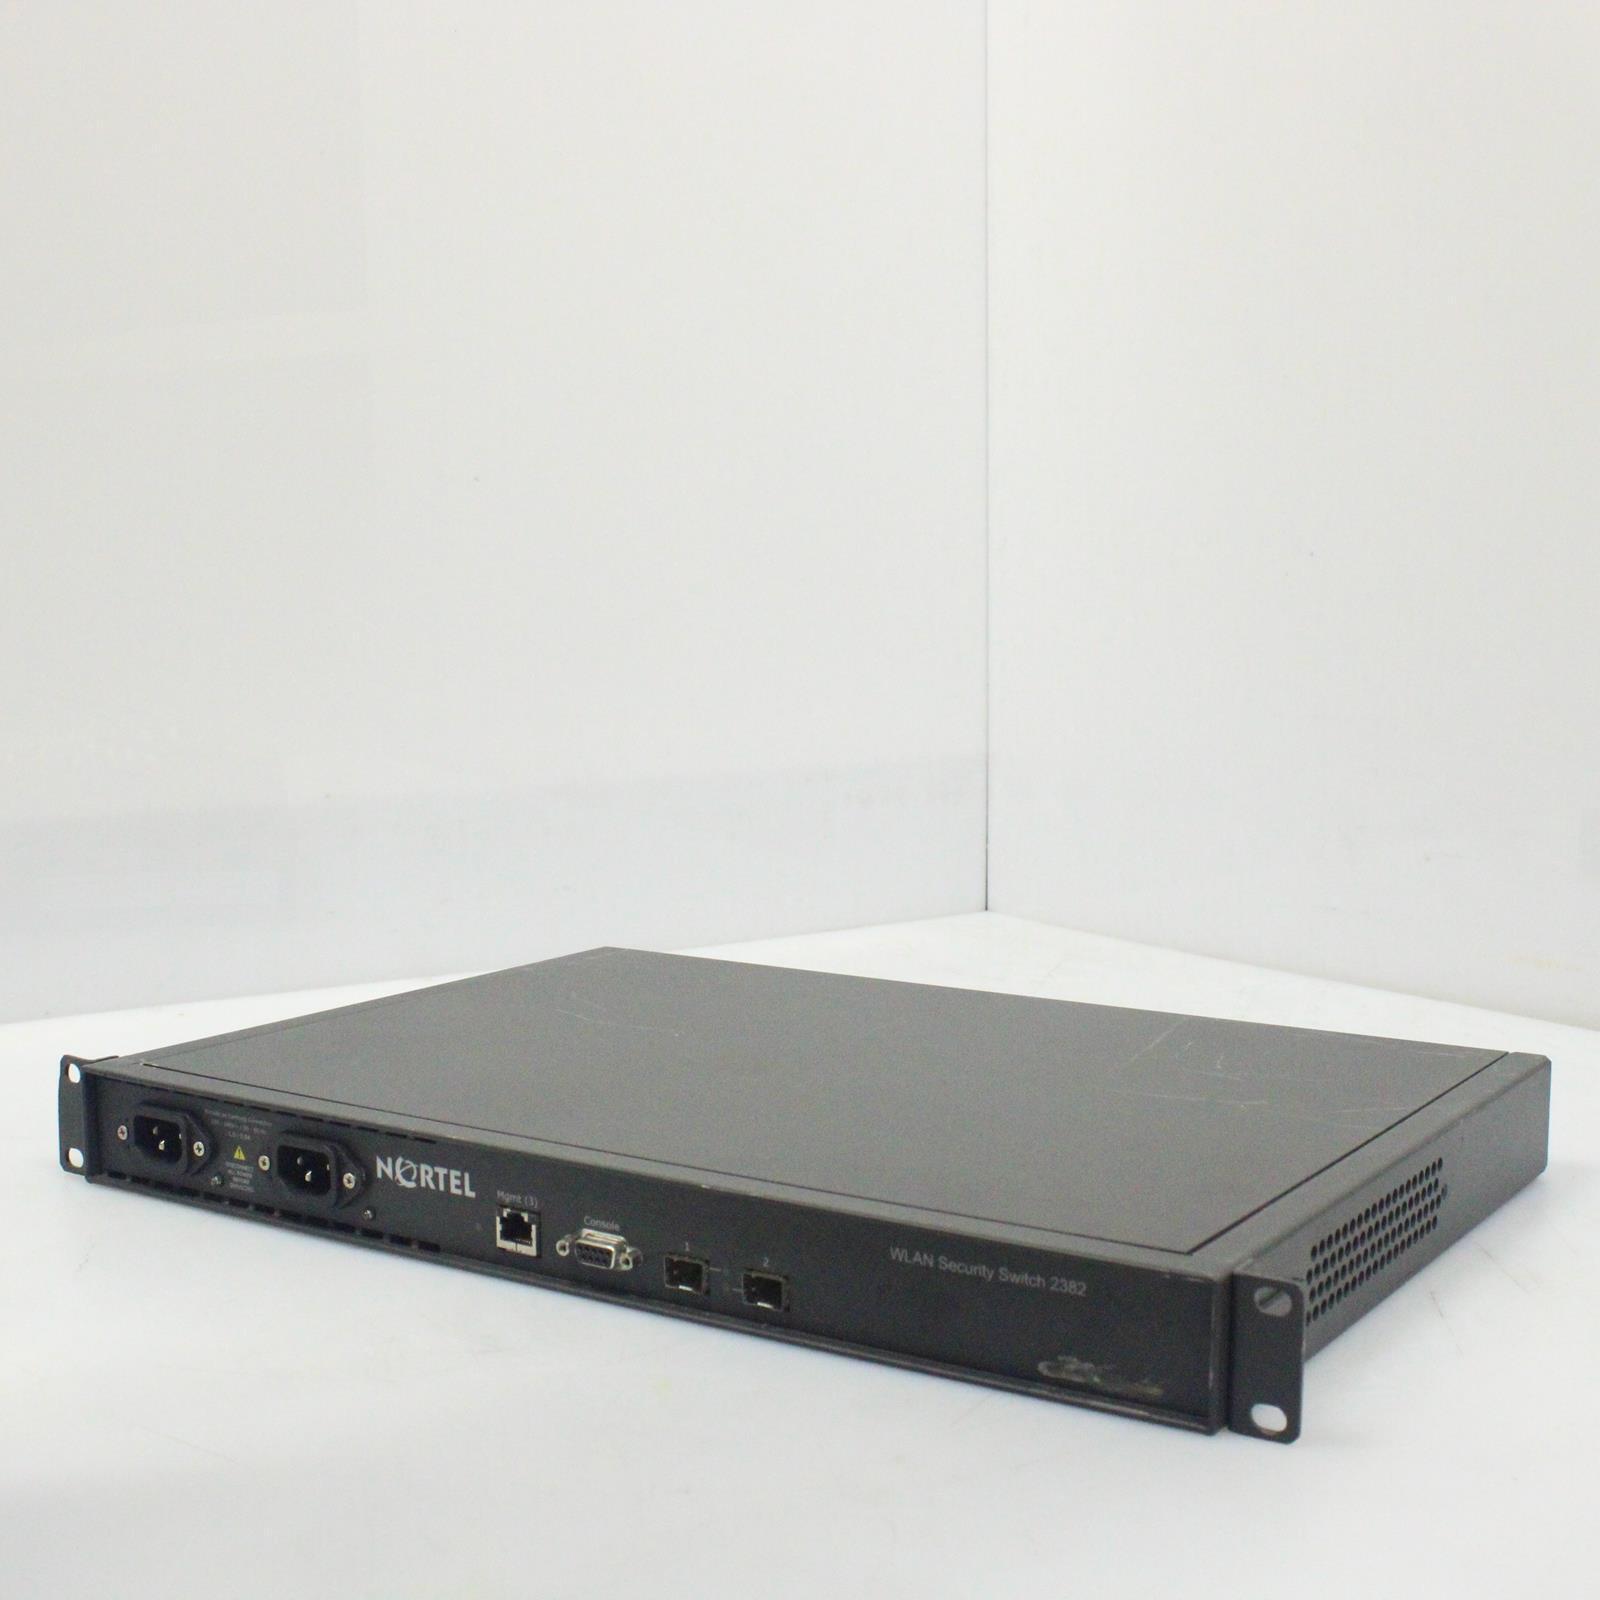 Nortel 2382 Ethernet Security Network Switch